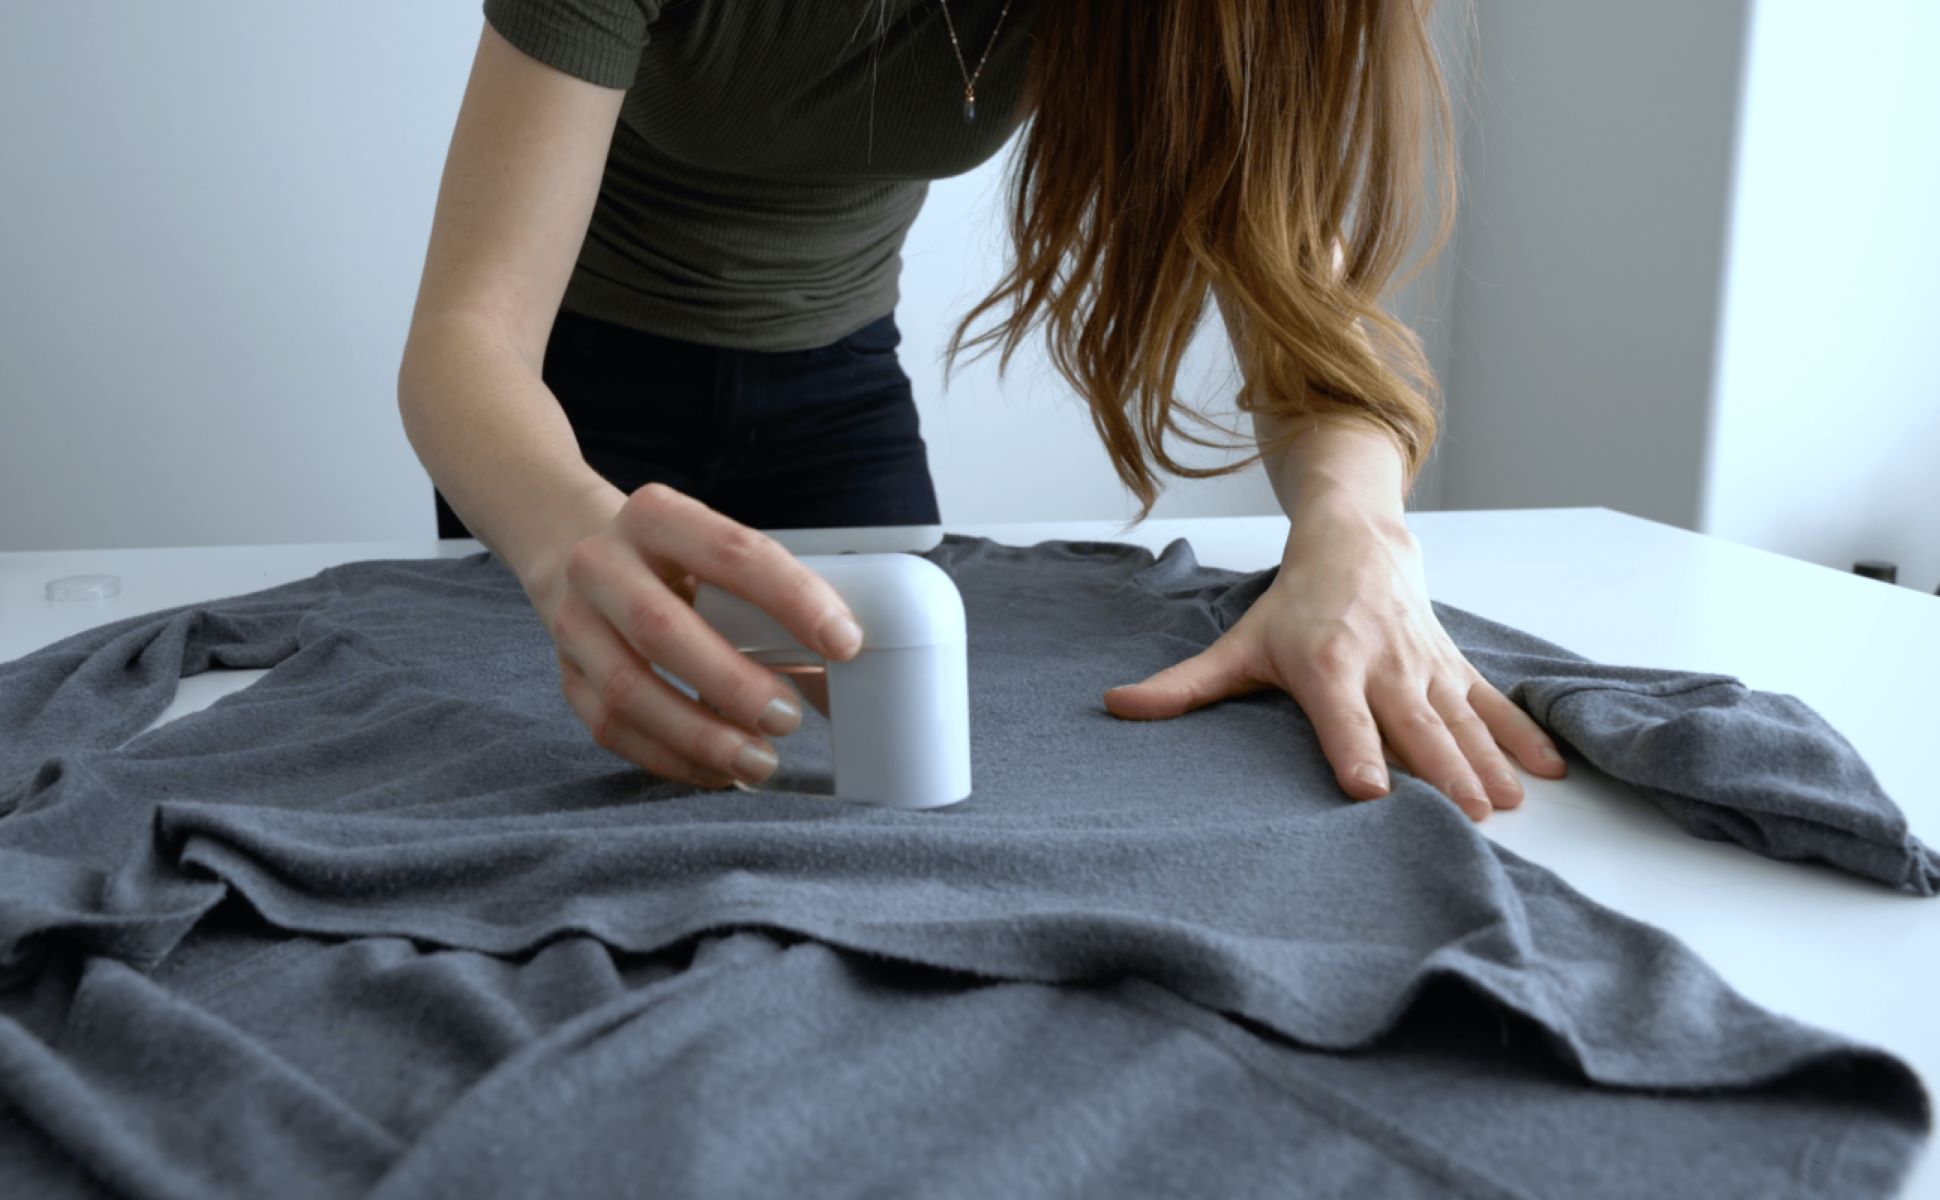 How To Get Lint Out Of A Blanket